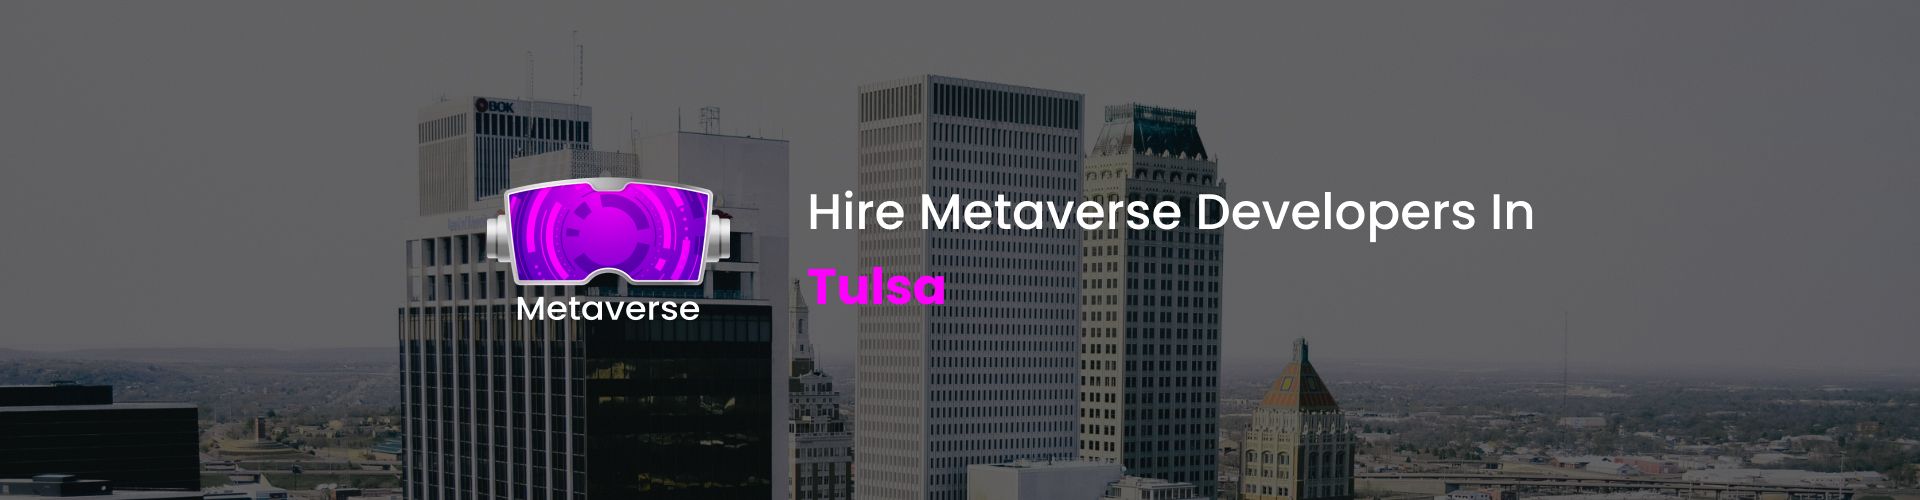 hire metaverse developers in tulsa